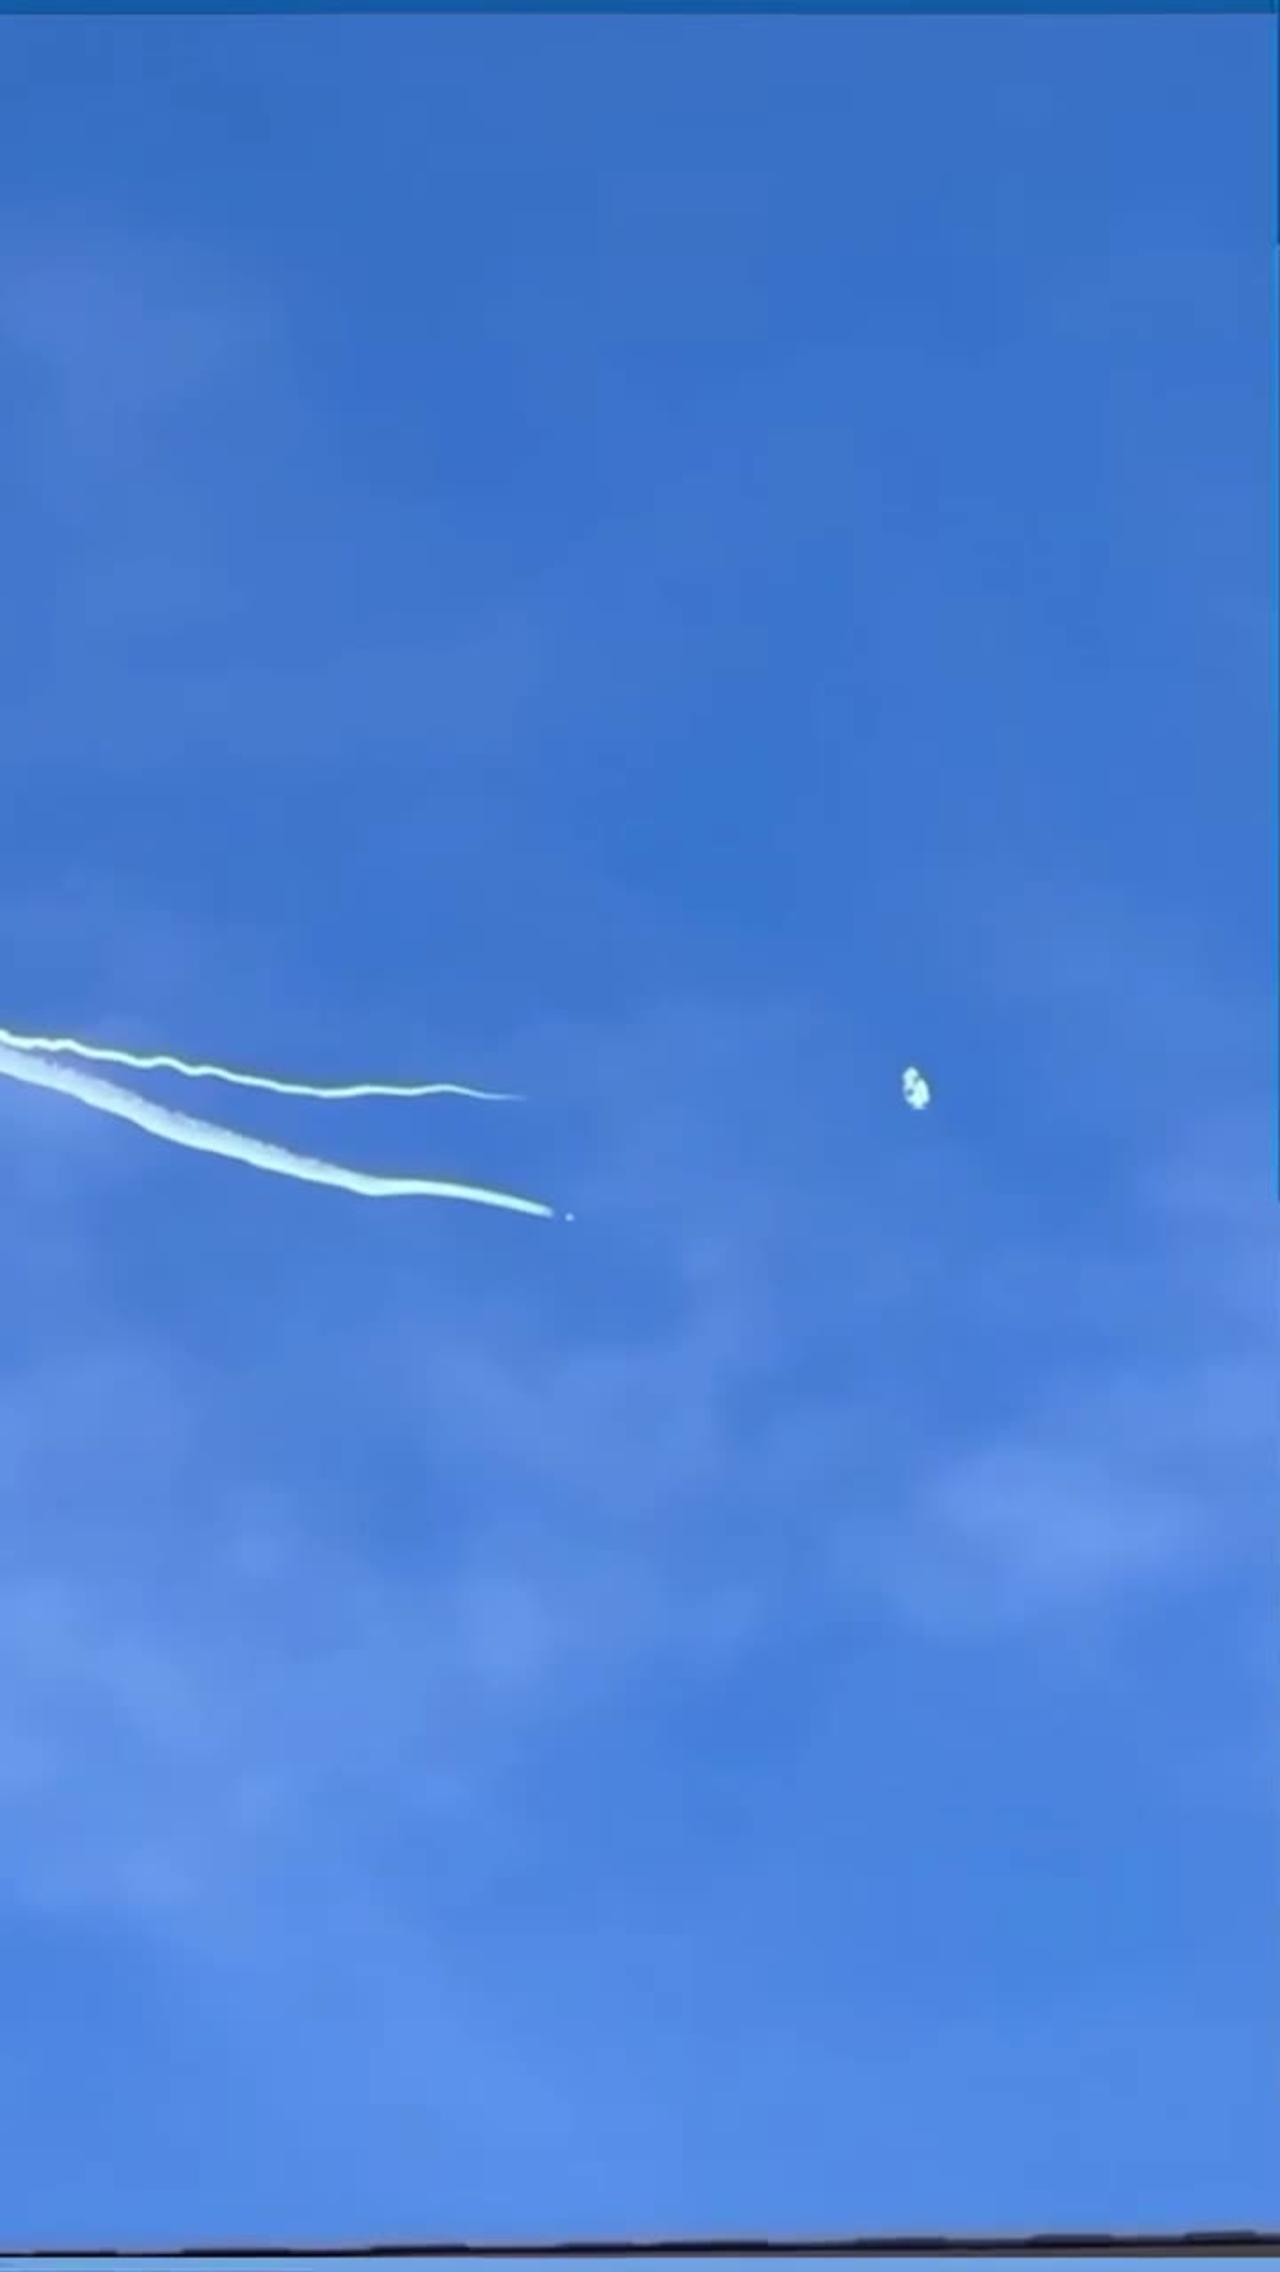 MISSILE ATTACK ON CHINA BALLOON